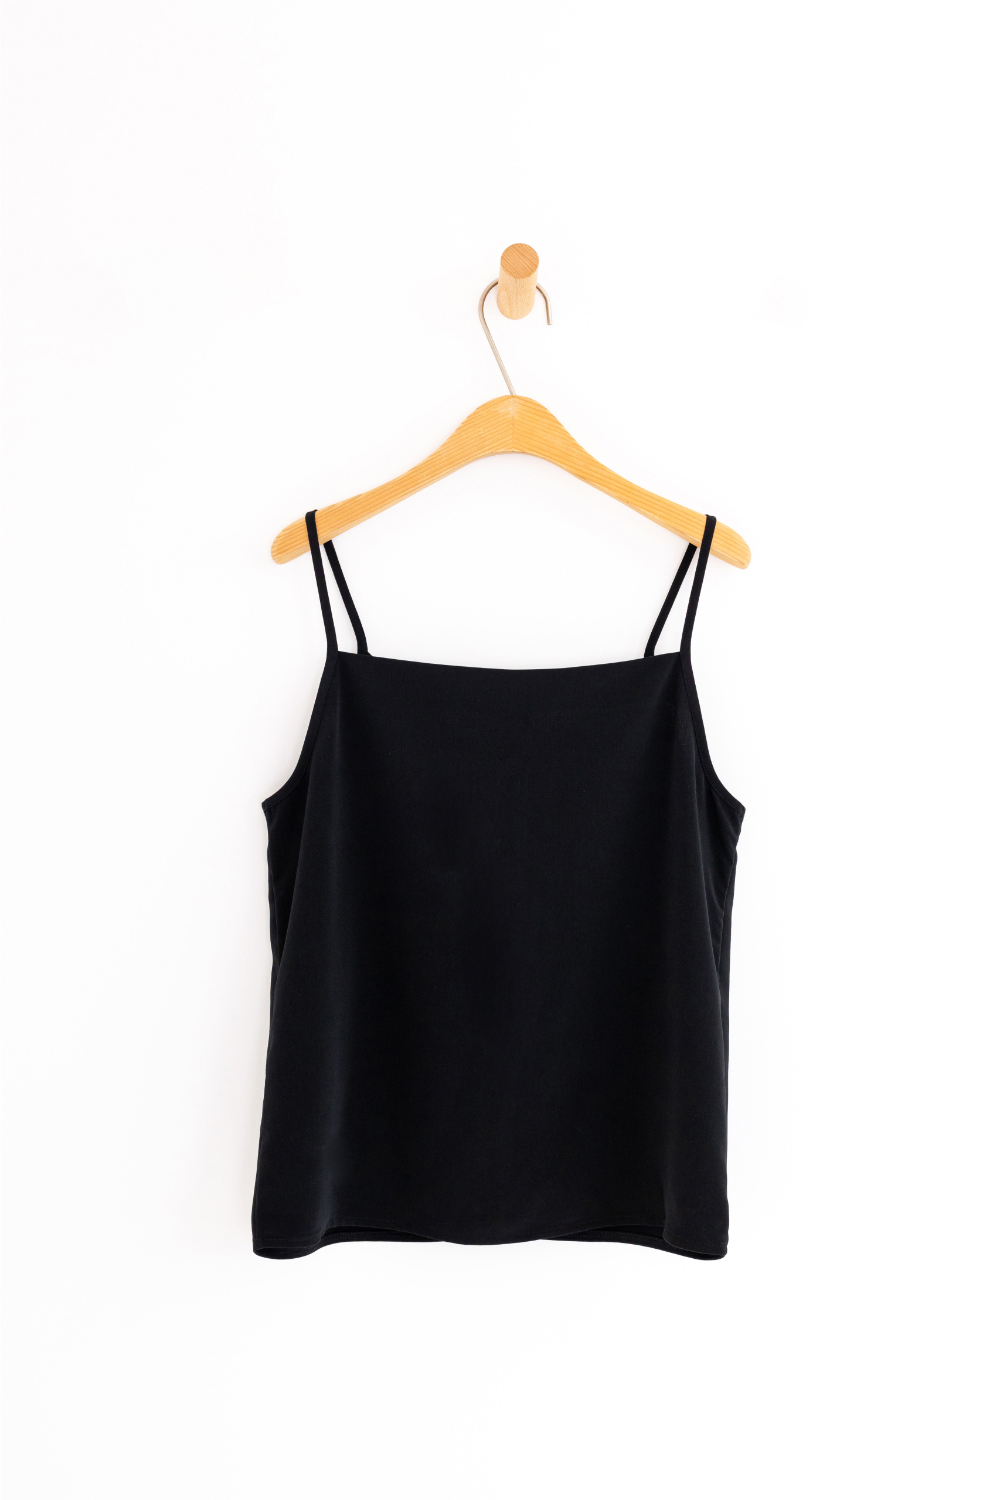 sleeveless charcoal color image-S1L18